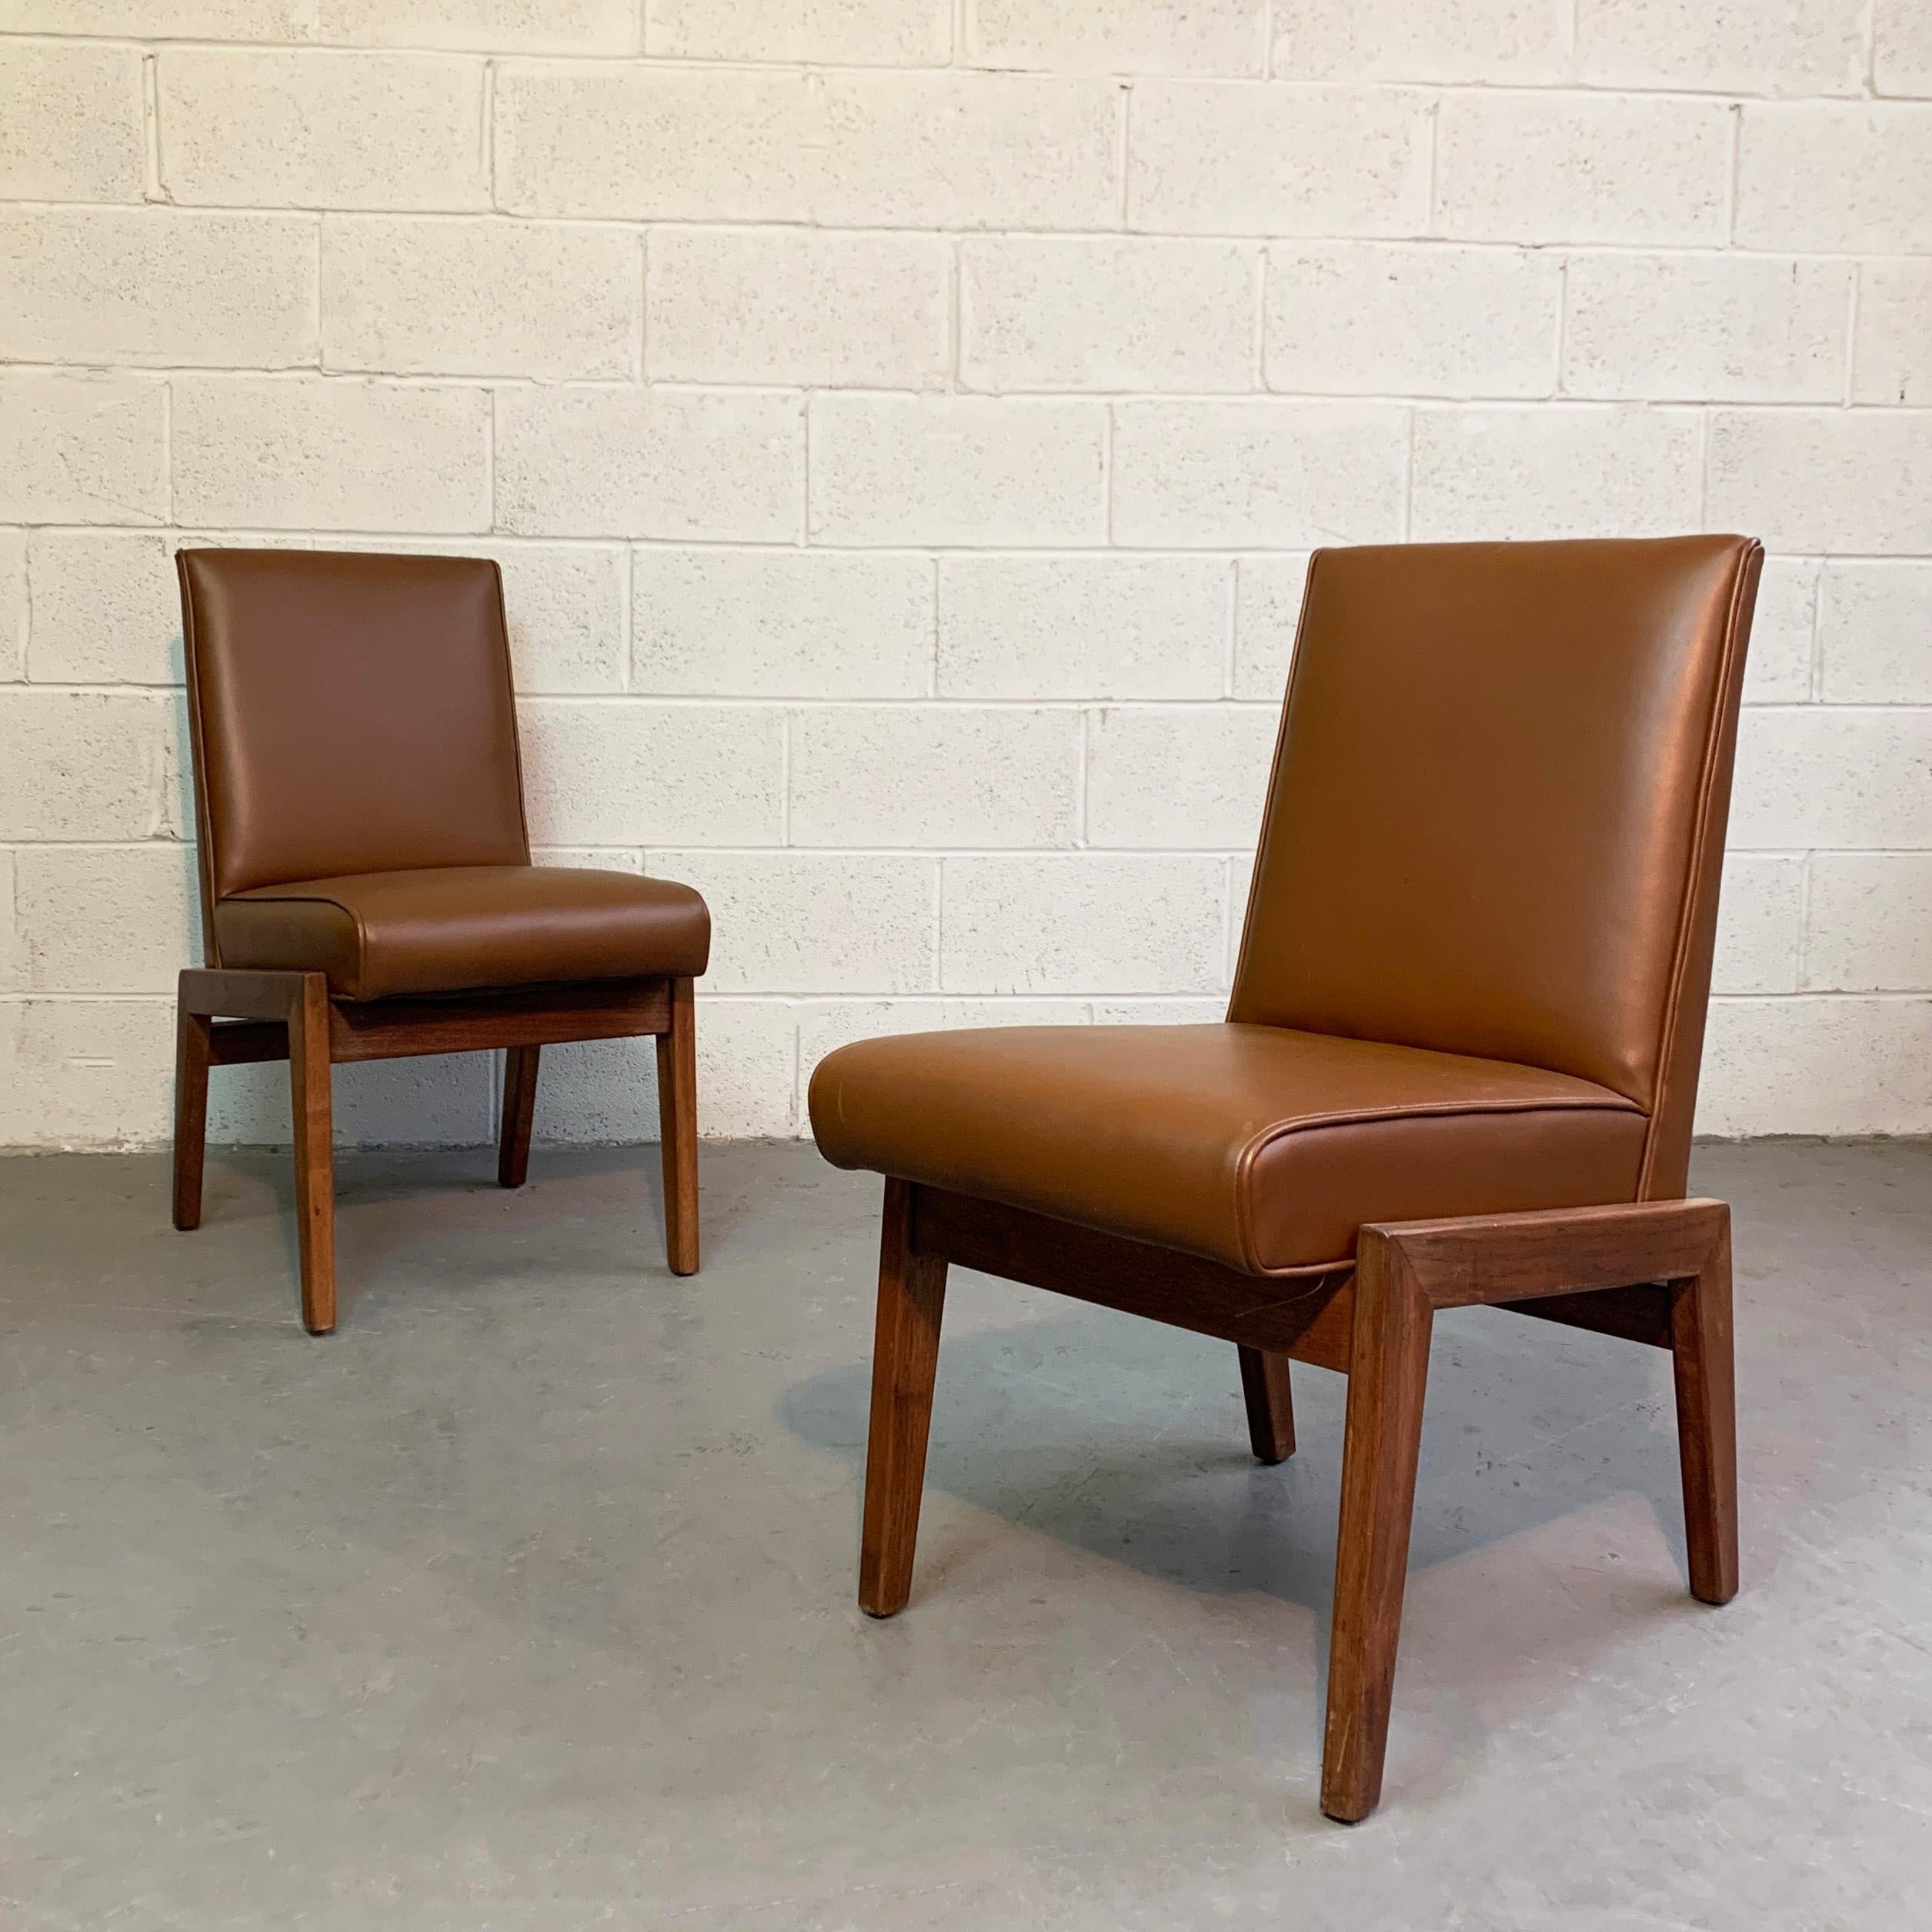 Mid-Century Modern, side chairs atrributed to Jens Risom feature walnut frames with caramel brown Naugahyde upholstery.